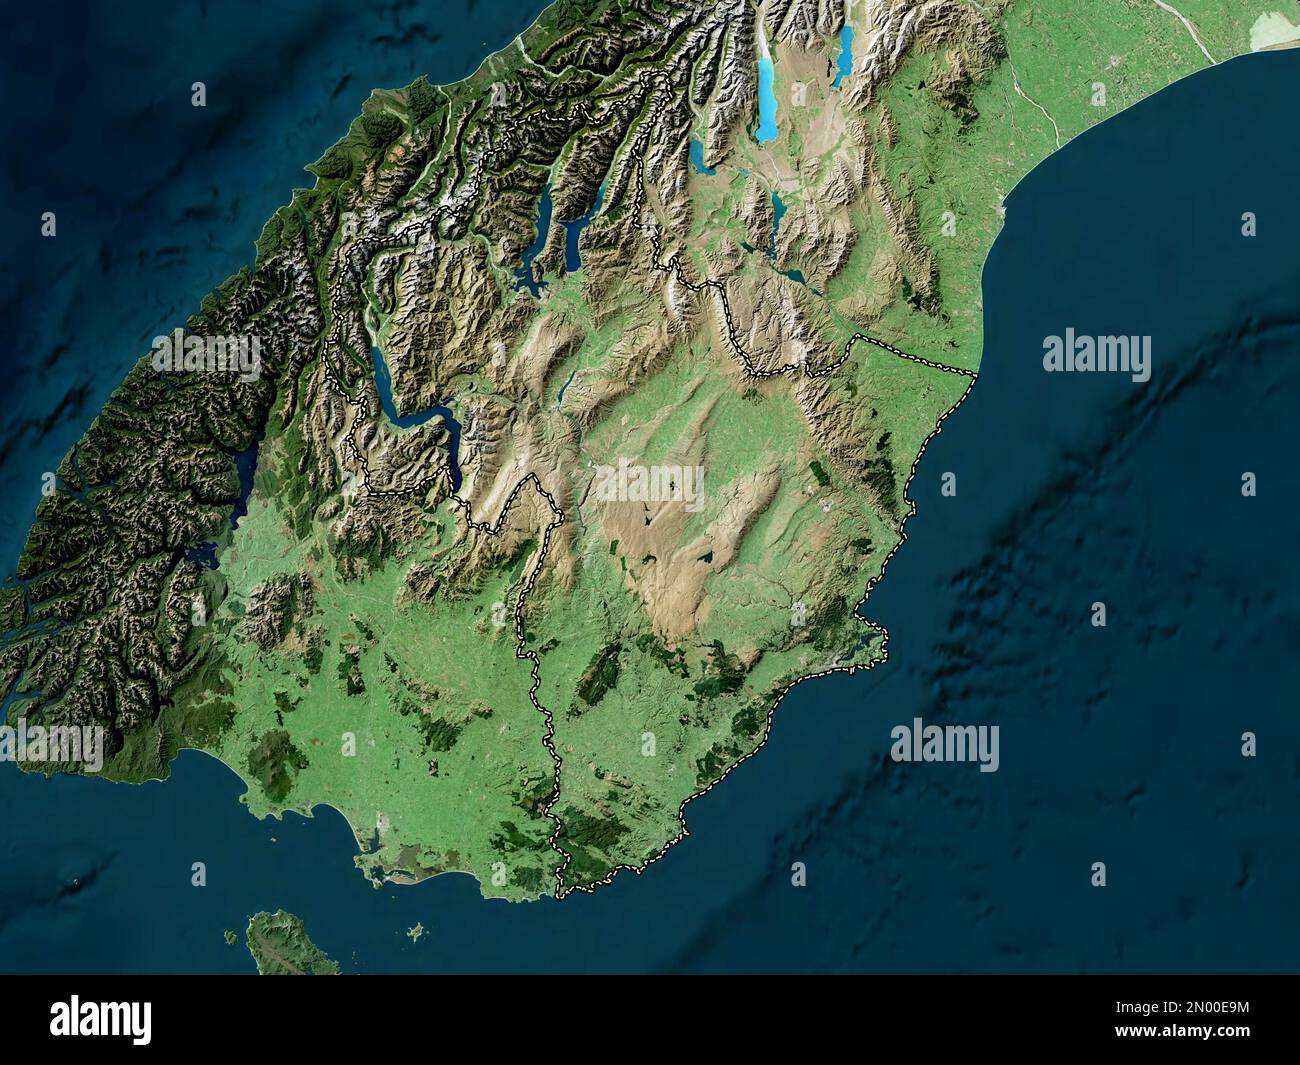 Otago, regional council of New Zealand. Low resolution satellite map Stock Photo